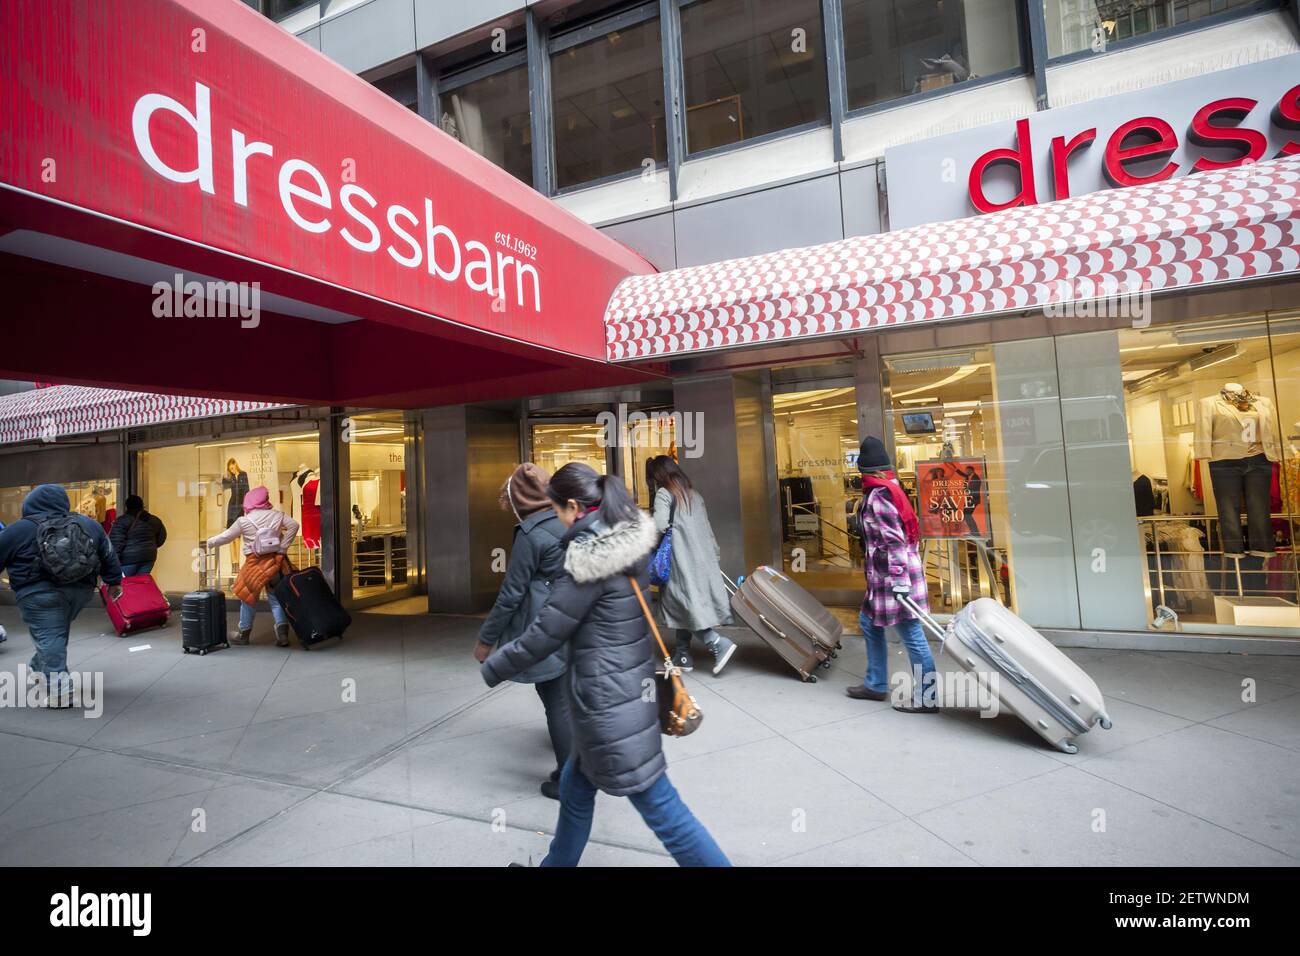 A Dressbarn women's clothing store in Midtwon Manhattan in New York on  Friday, March 3, 2017. Ascena Retail Group saw its shares drop over 30%  after releasing its adjusted second-half outlook which